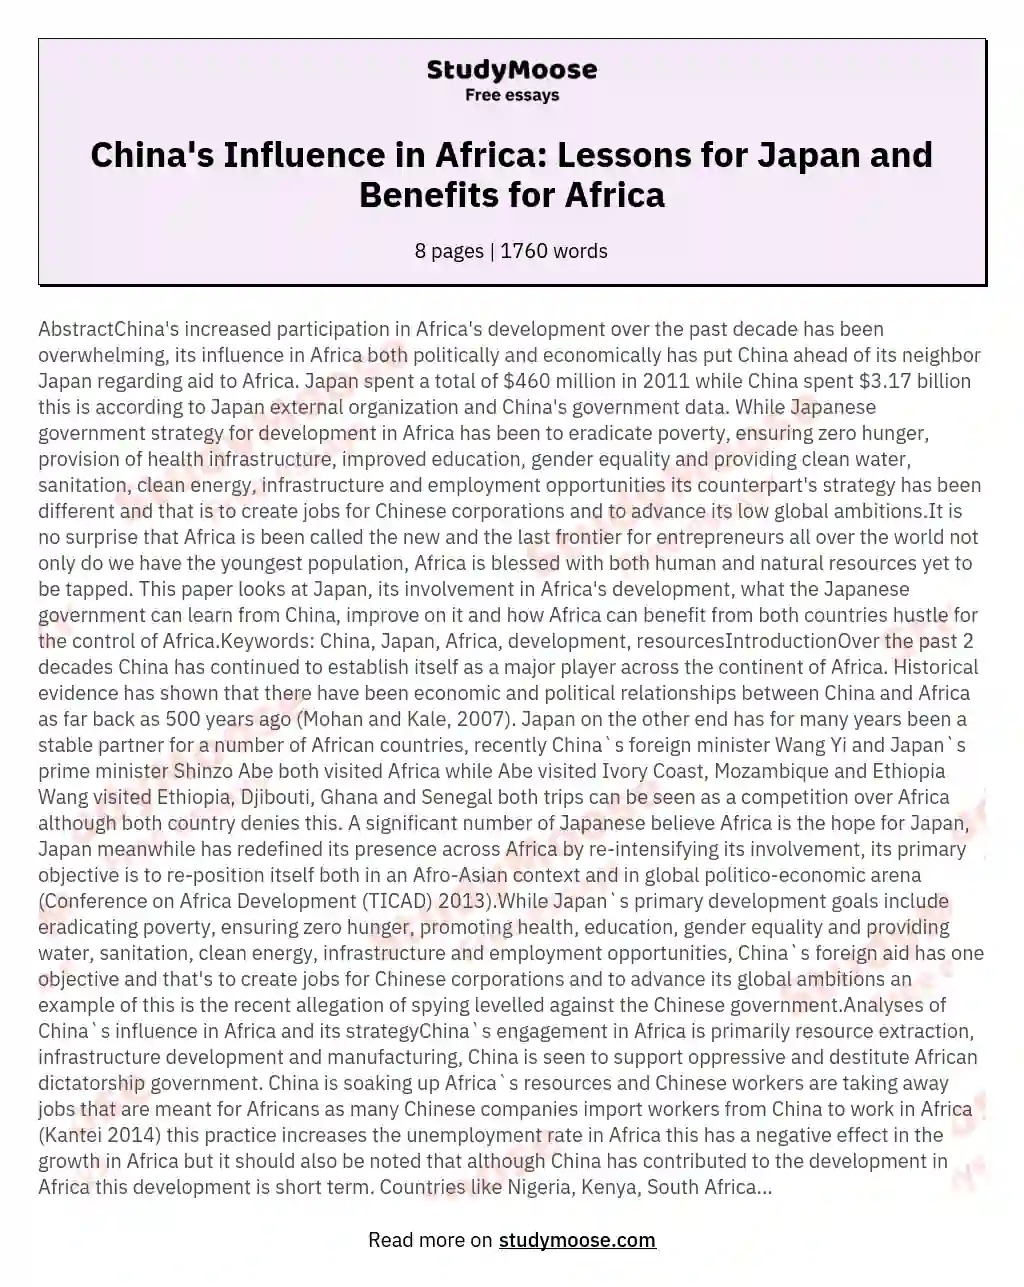 China's Increased influence in Africa, how can Japan learn from it and how Africa can benefit